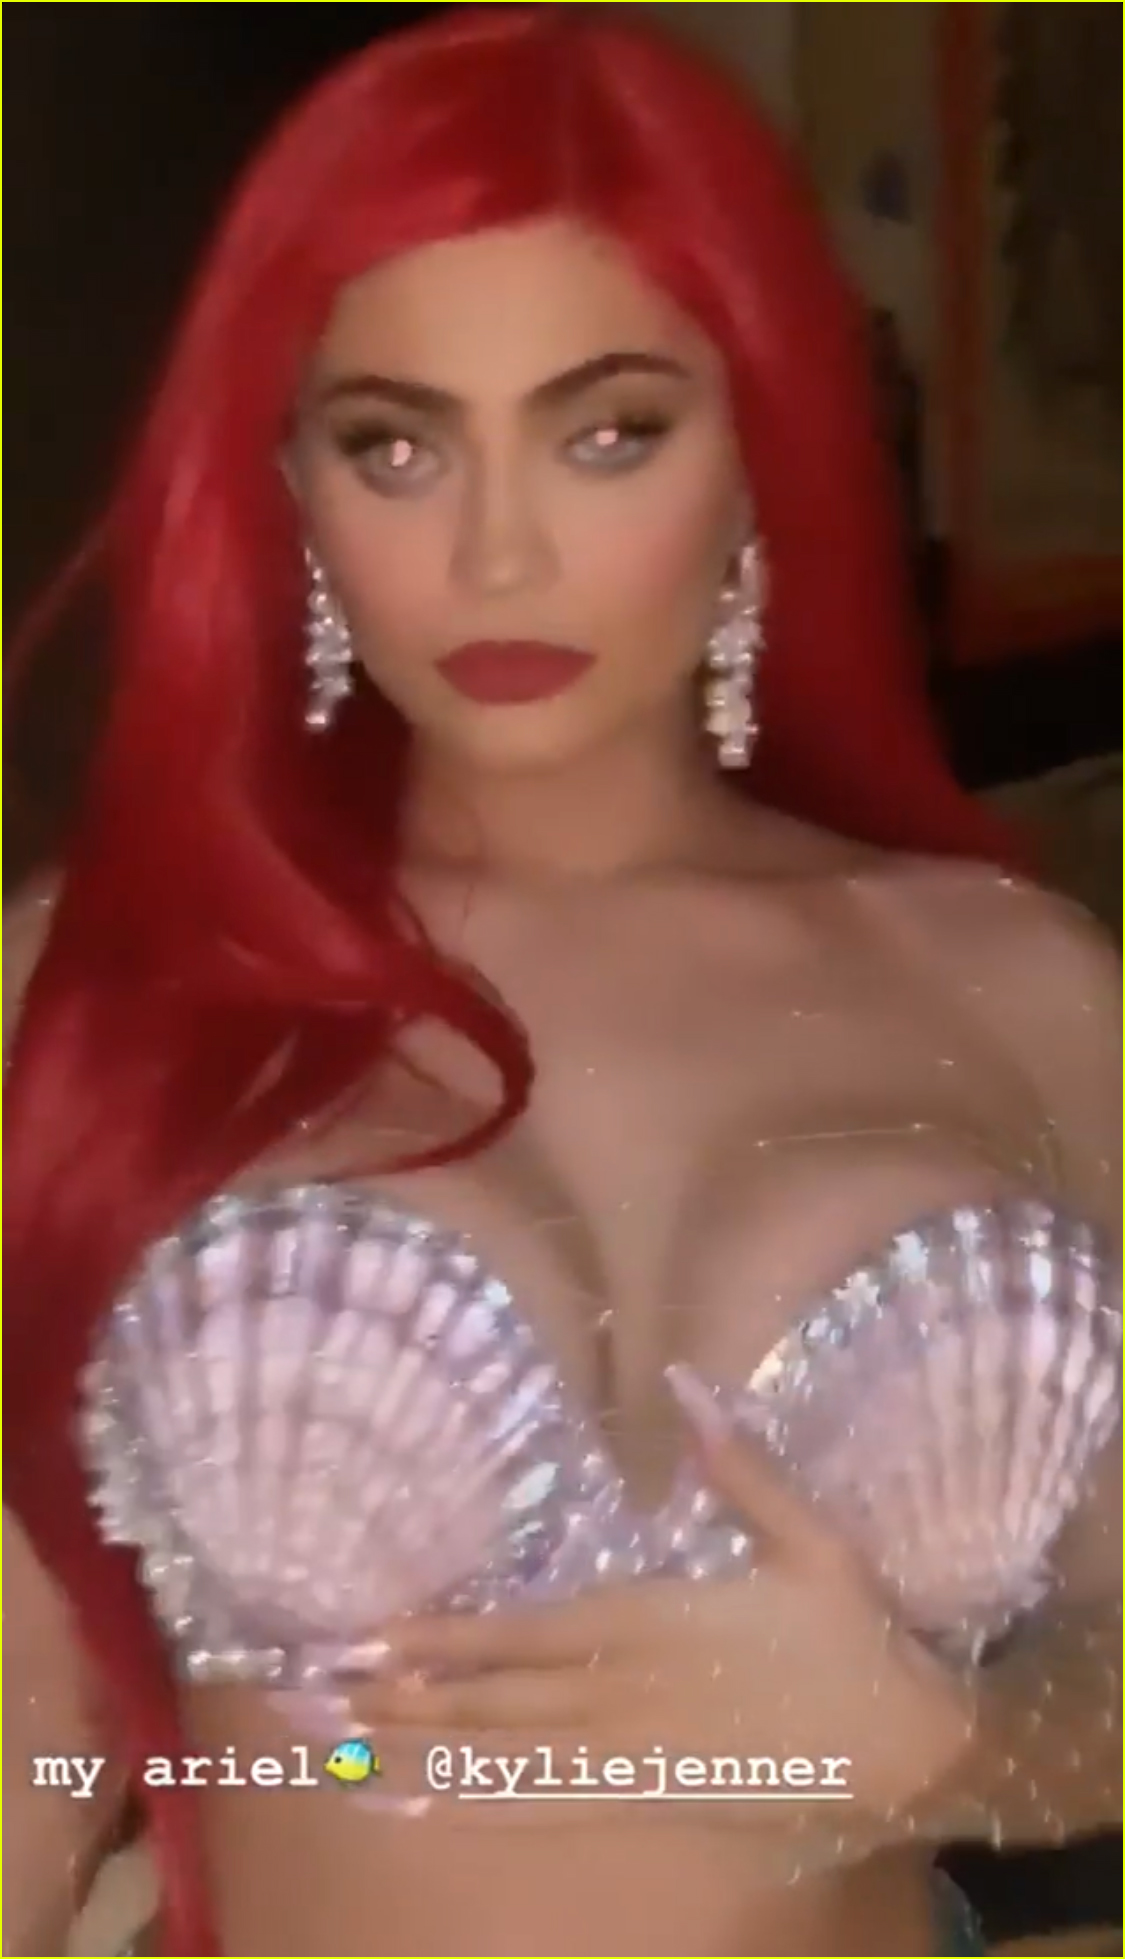 kylie jenner dresses as super sexy ariel from the little mermaid for halloween 07